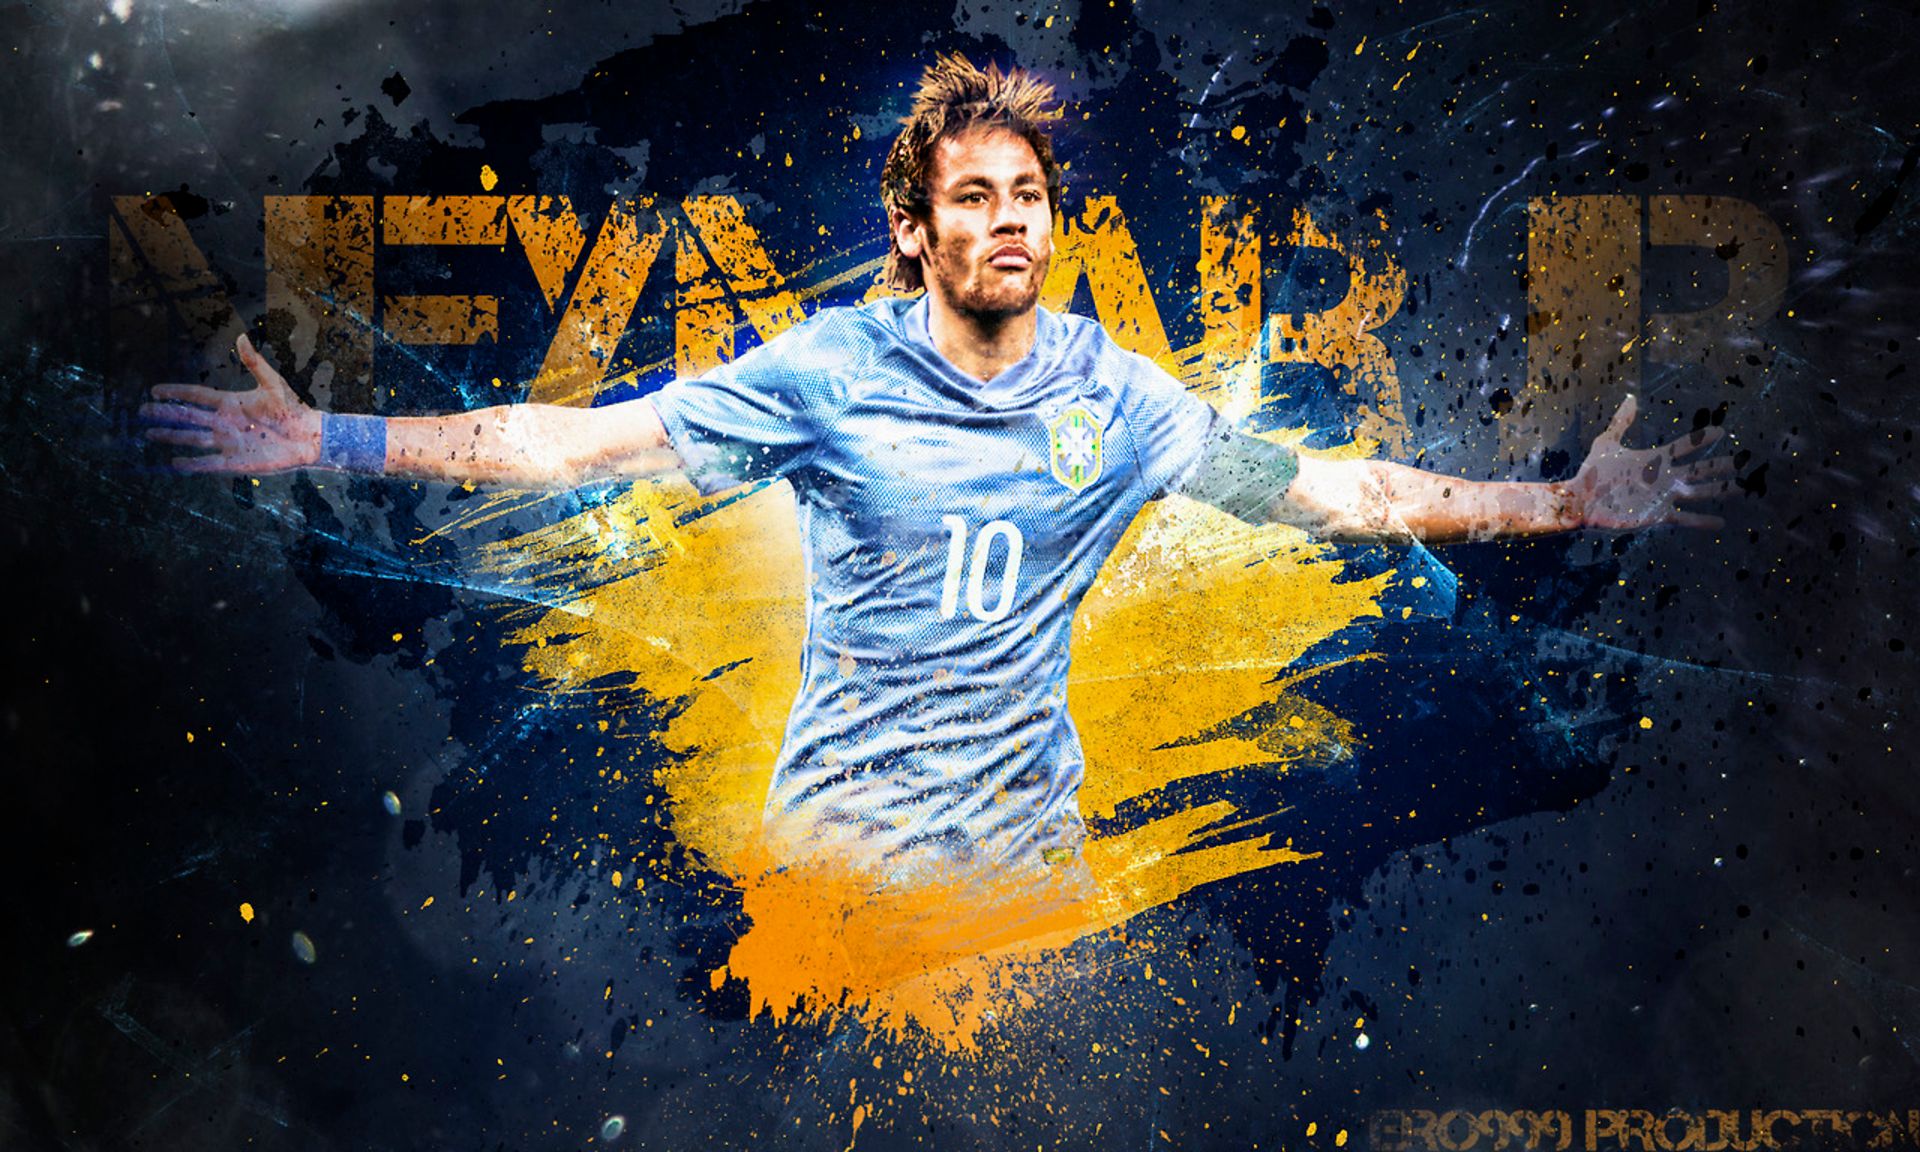  Neymar Wallpapers 4K  Full HD Backgrounds  for PC  How to Install on Windows  PC Mac